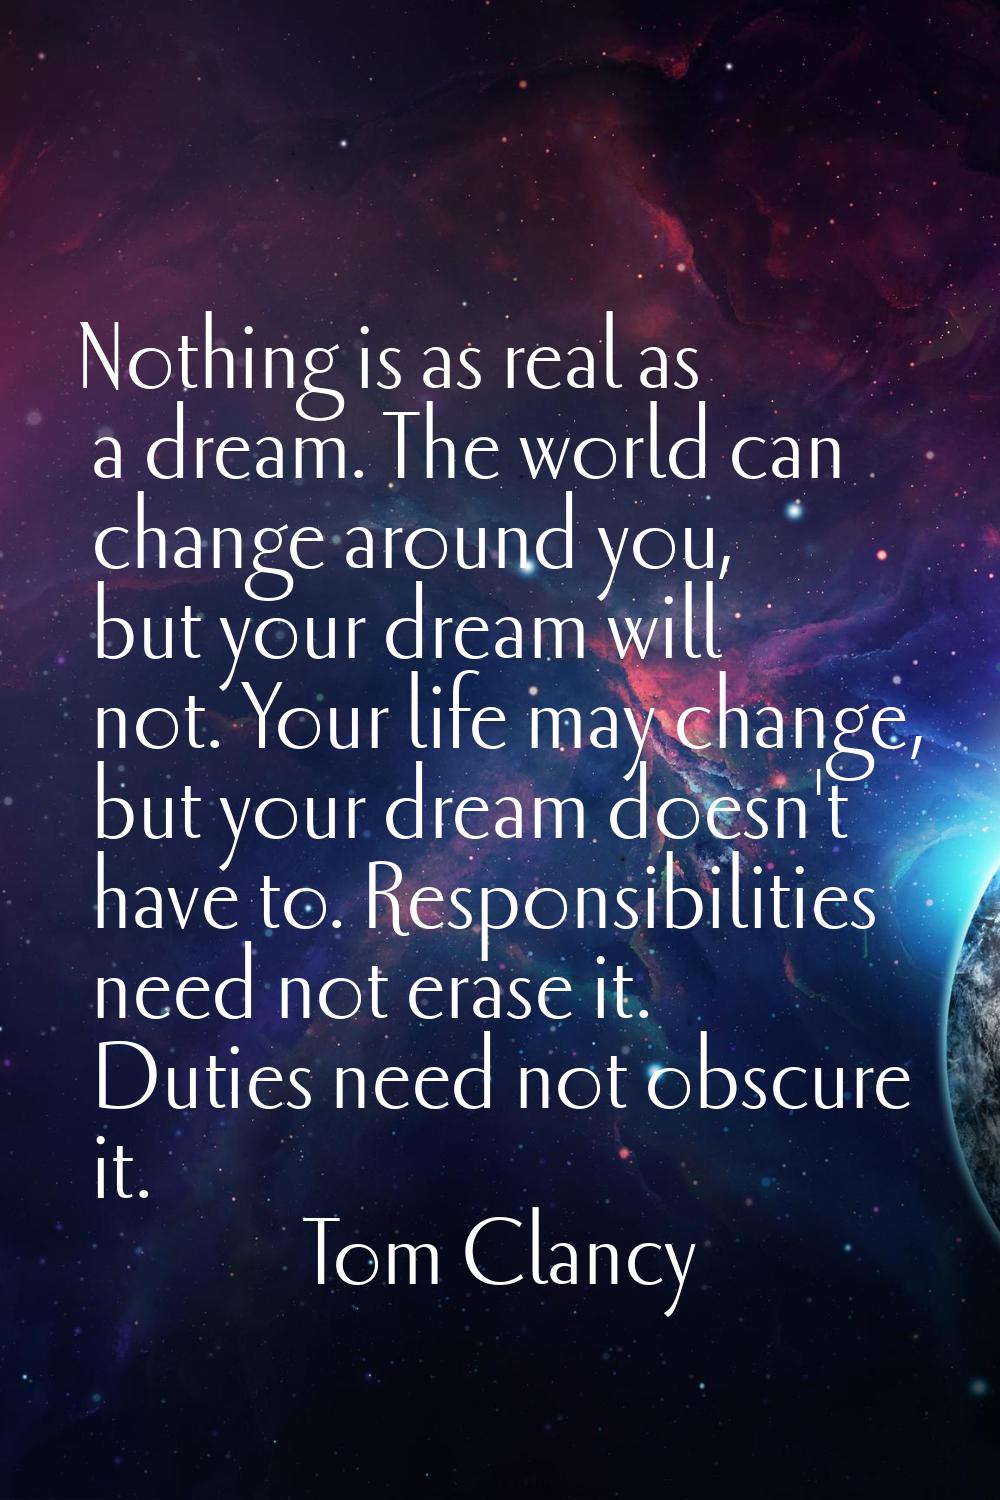 Nothing is as real as a dream. The world can change around you, but your dream will not. Your life 